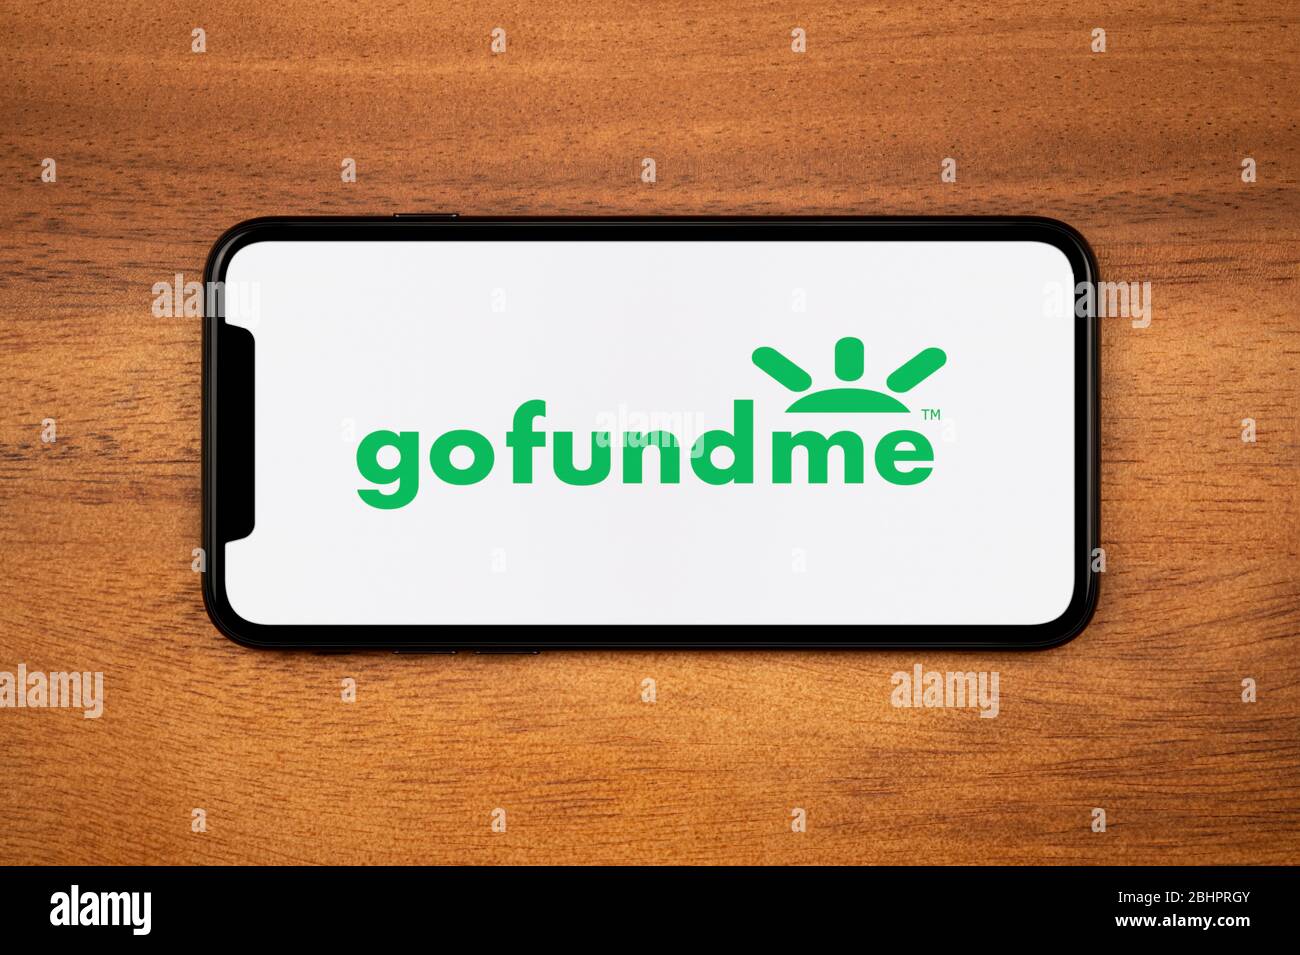 A smartphone showing the Gofundme logo rests on a plain wooden table (Editorial use only). Stock Photo